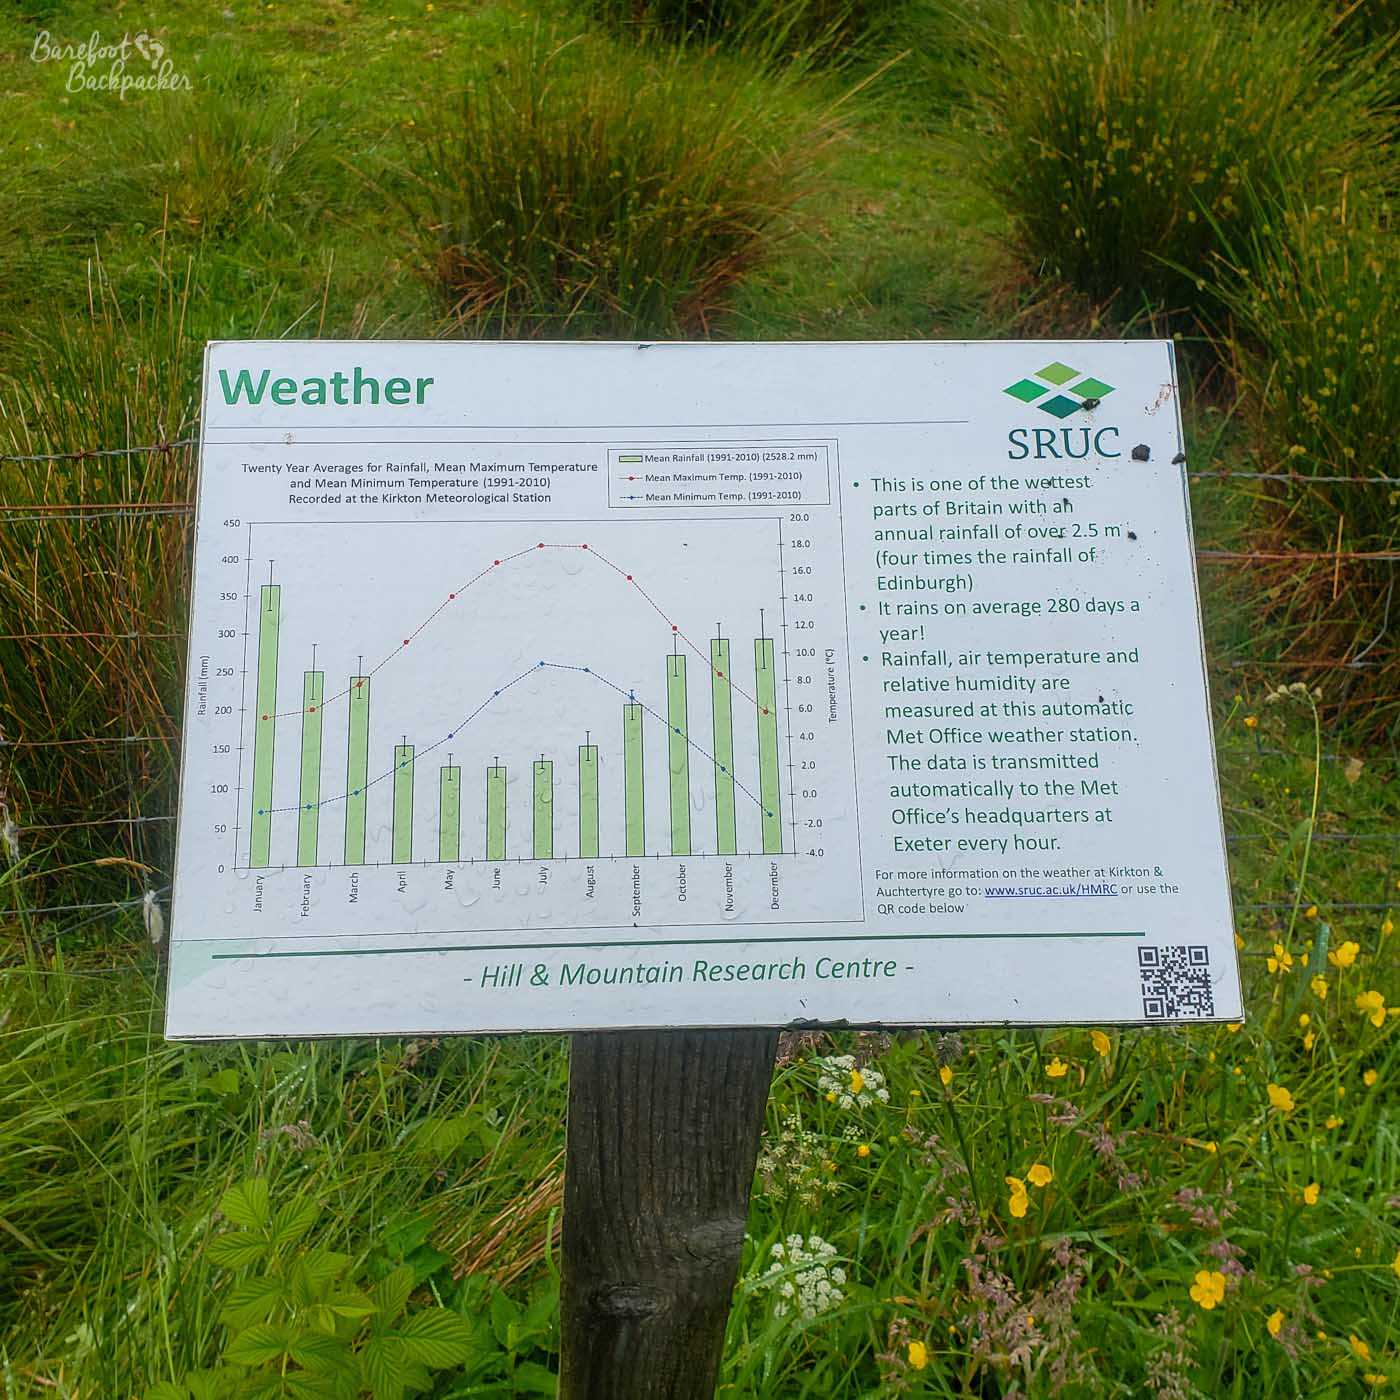 A sign in Strath Fillan from the Hill And Mountain Research Centre plotting the average rainfall per month in this area. On the sign are also a couple of facts about rain: firstly that this is one of the wettest parts of Britain, with average rainfall of about 2.5m, four times higher than Edinburgh, and secondly that it rains here on average 280 days in a year.